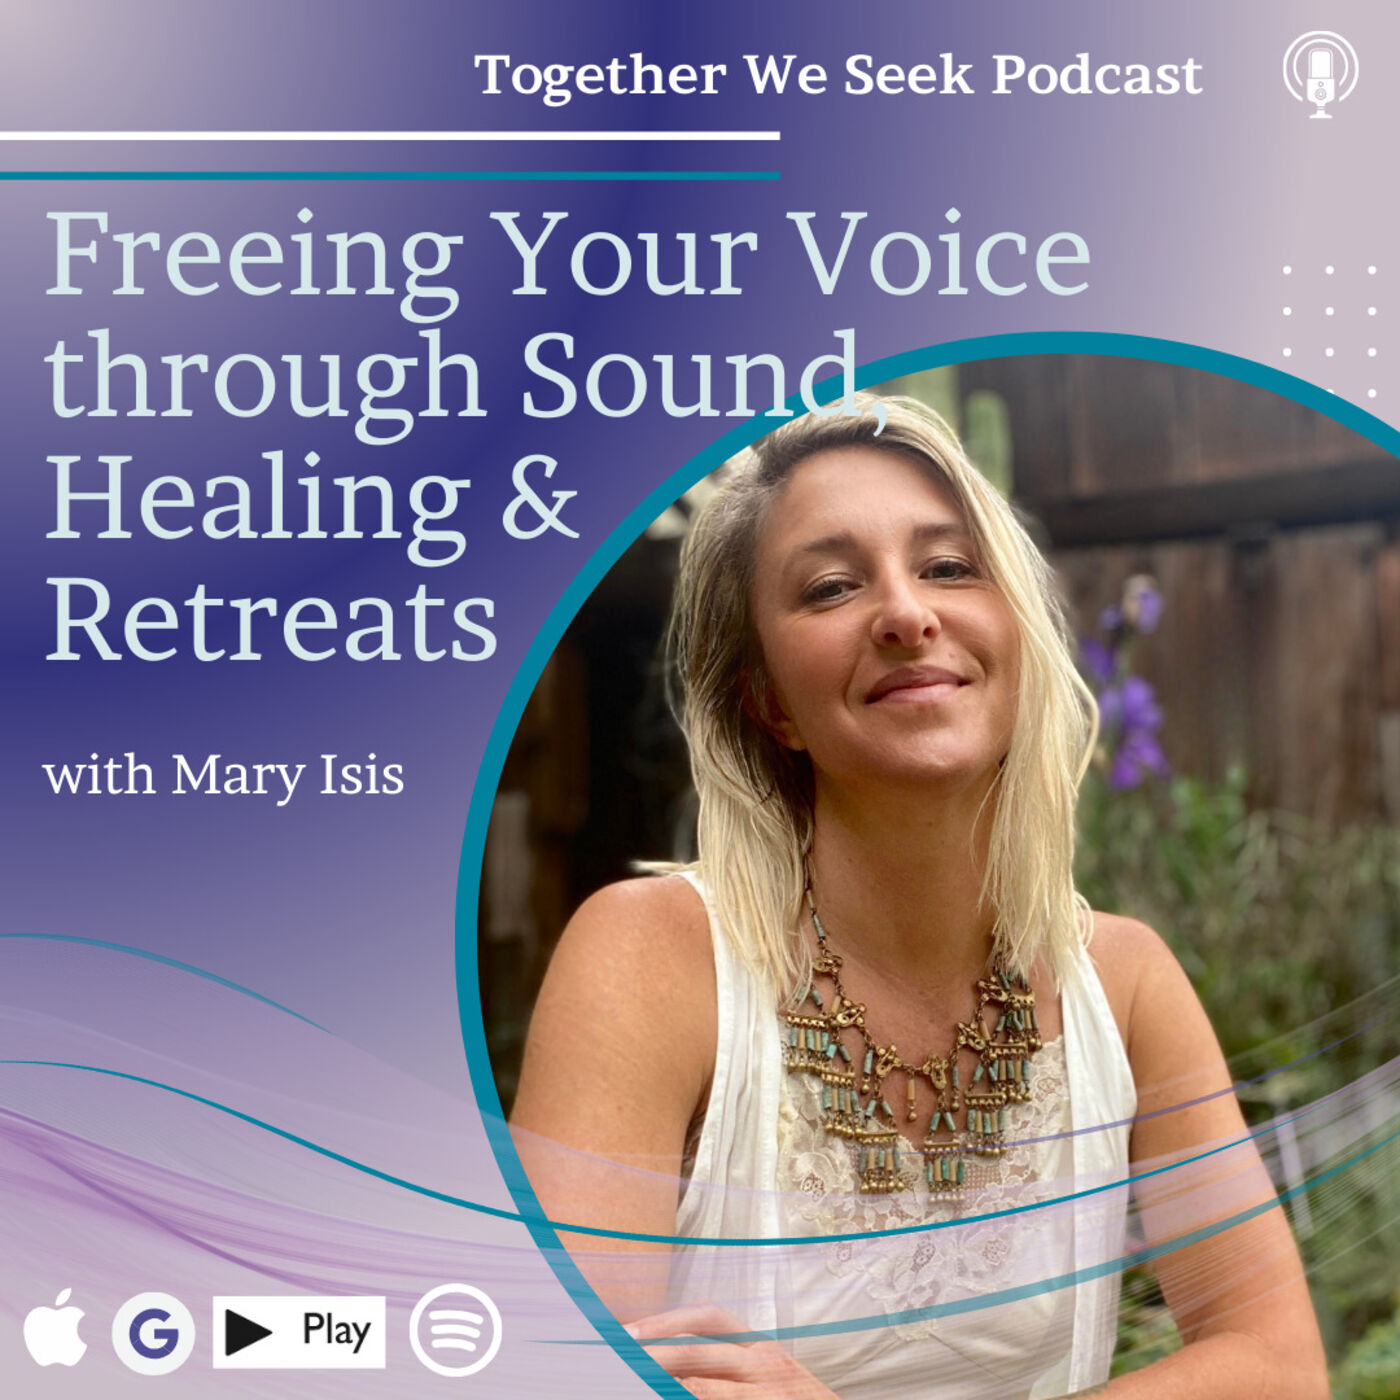 Freeing Your Voice through Sound, Healing & Retreats with Mary Isis